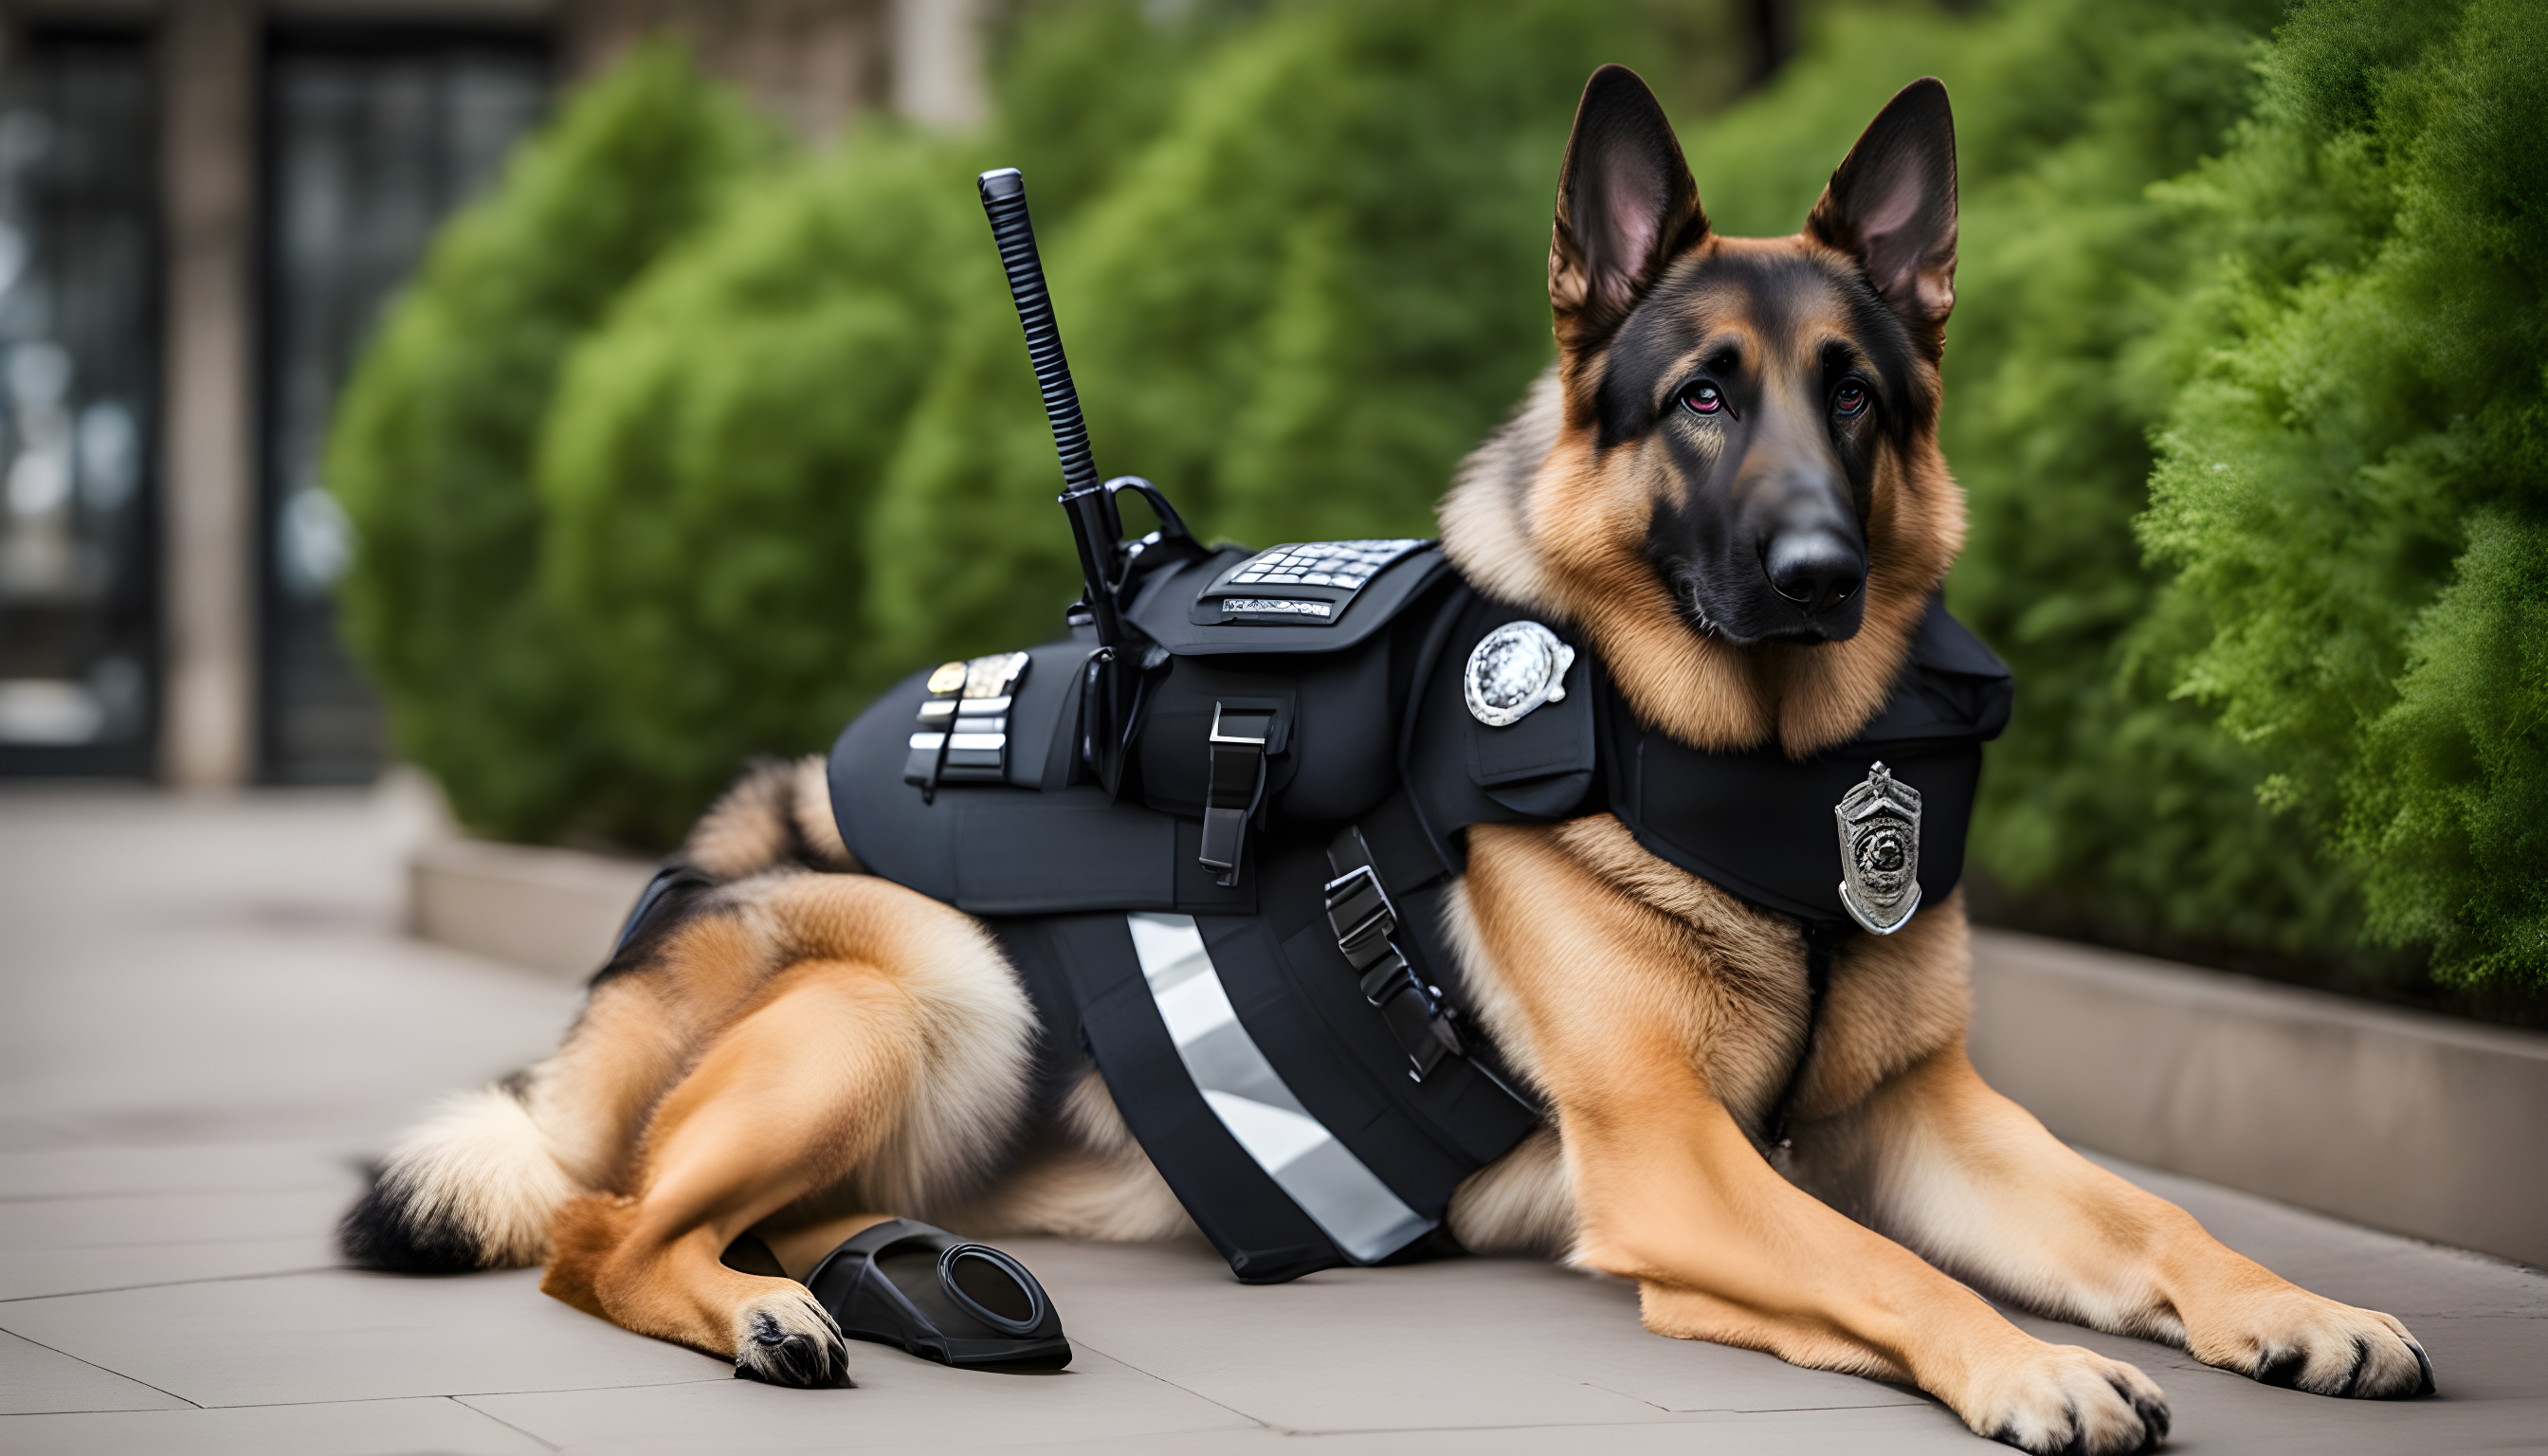 German Shepherd in a police uniform, serving some serious "protect and serve" vibes.